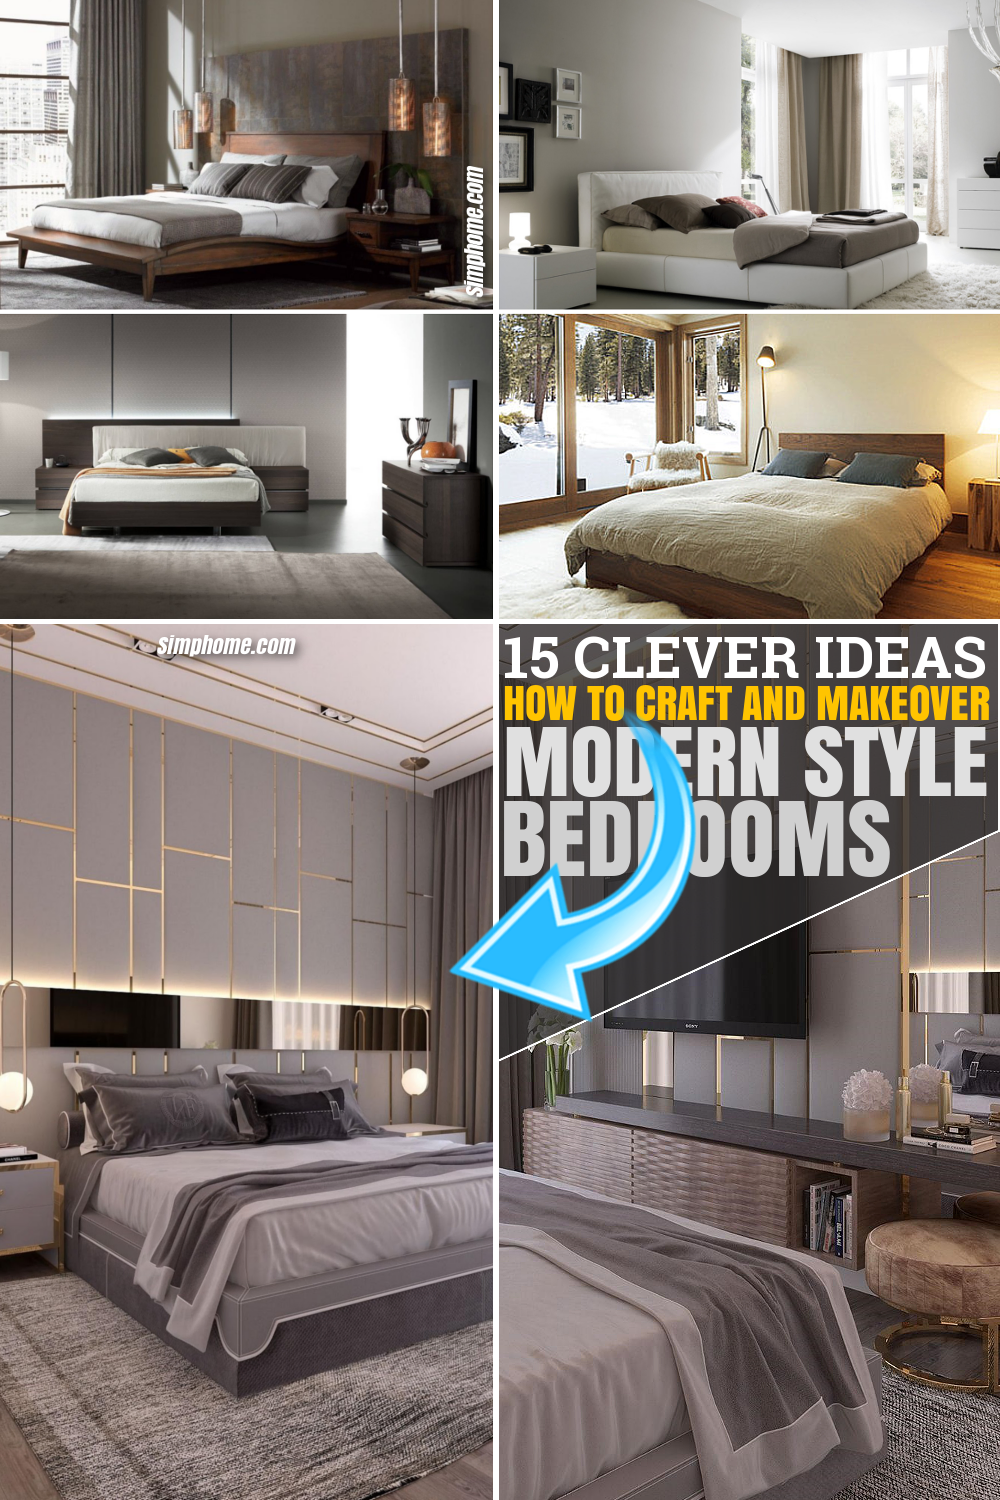 SIMPHOME.COM 10 How to Craft Modern Style Bedroom PINTEREST IMAGE